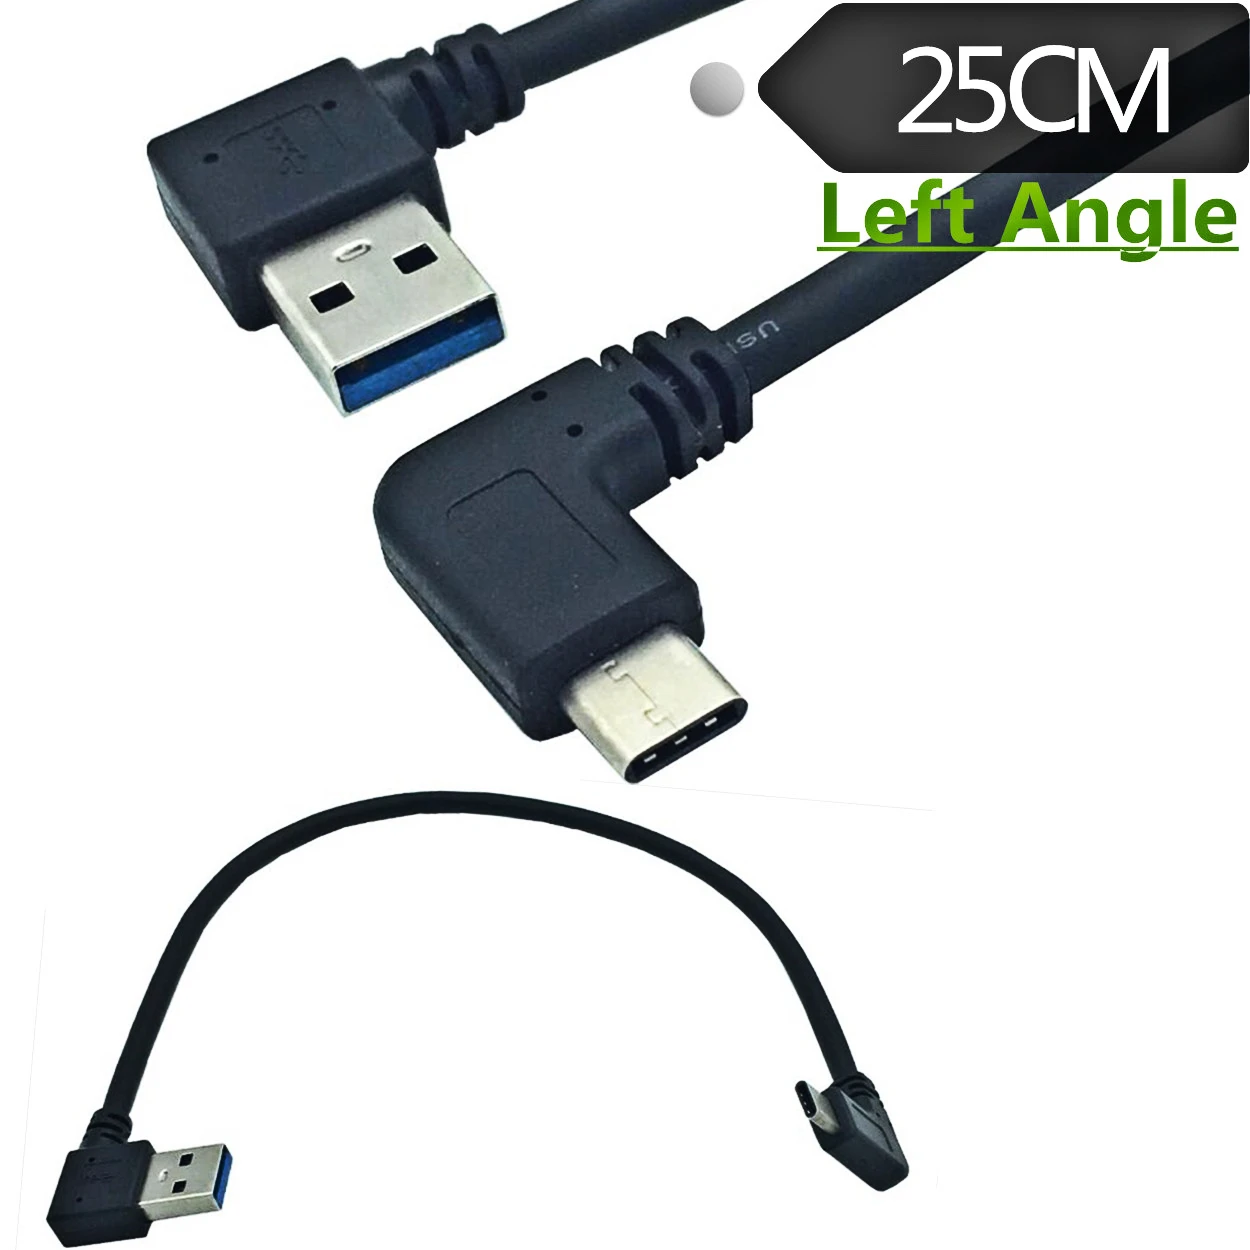 

AM Left/Type-C Bend 90 Degree Micro USB Male to USB Male Data Charging Connector Cable 0.25m for Phone Tablet